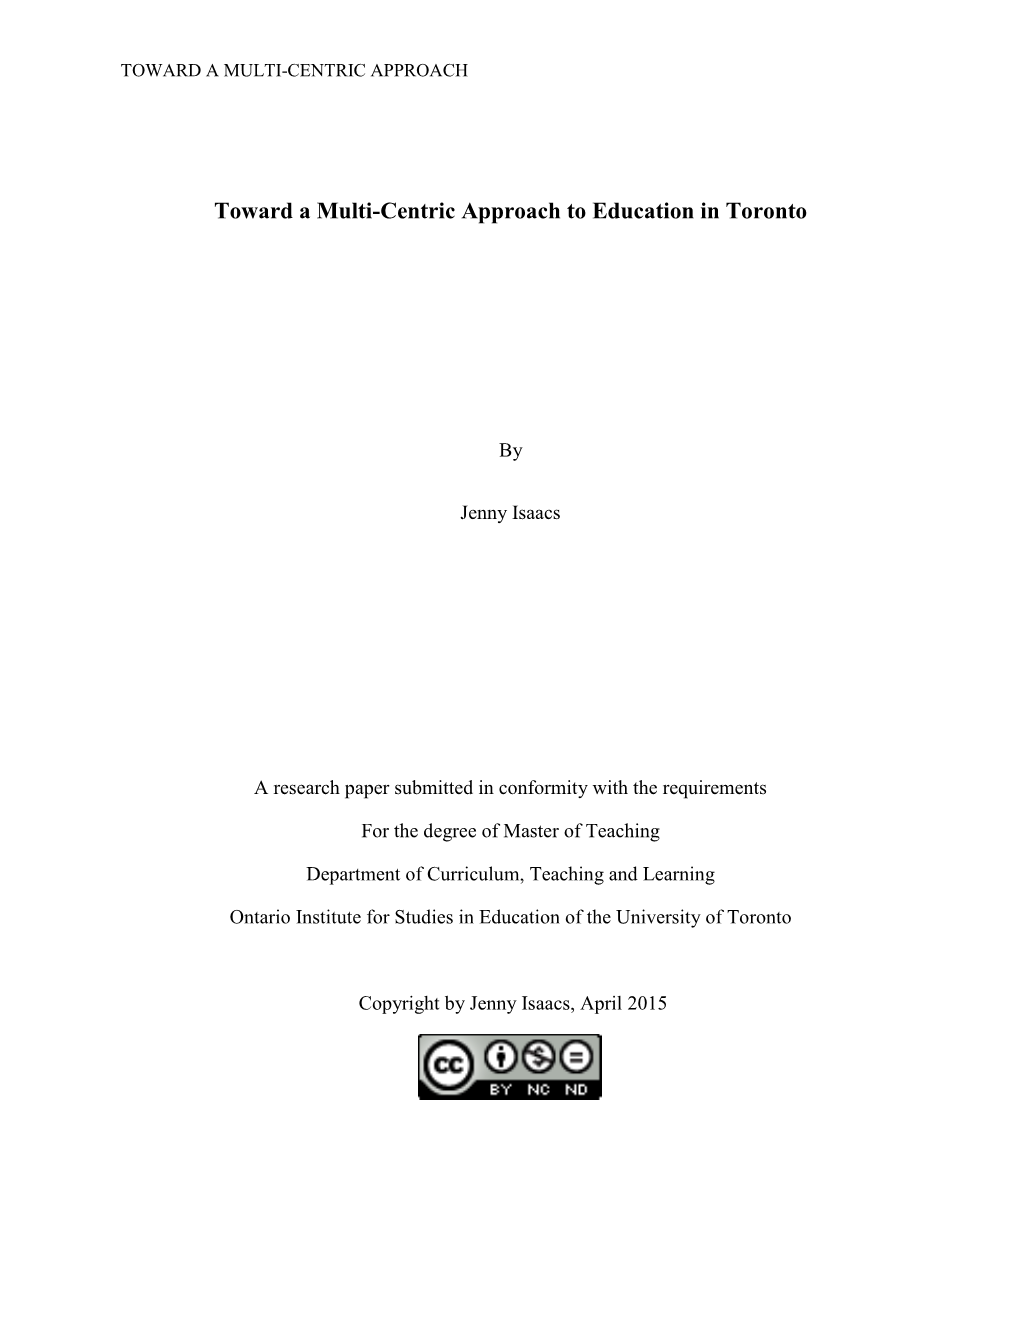 Toward a Multi-Centric Approach to Education in Toronto